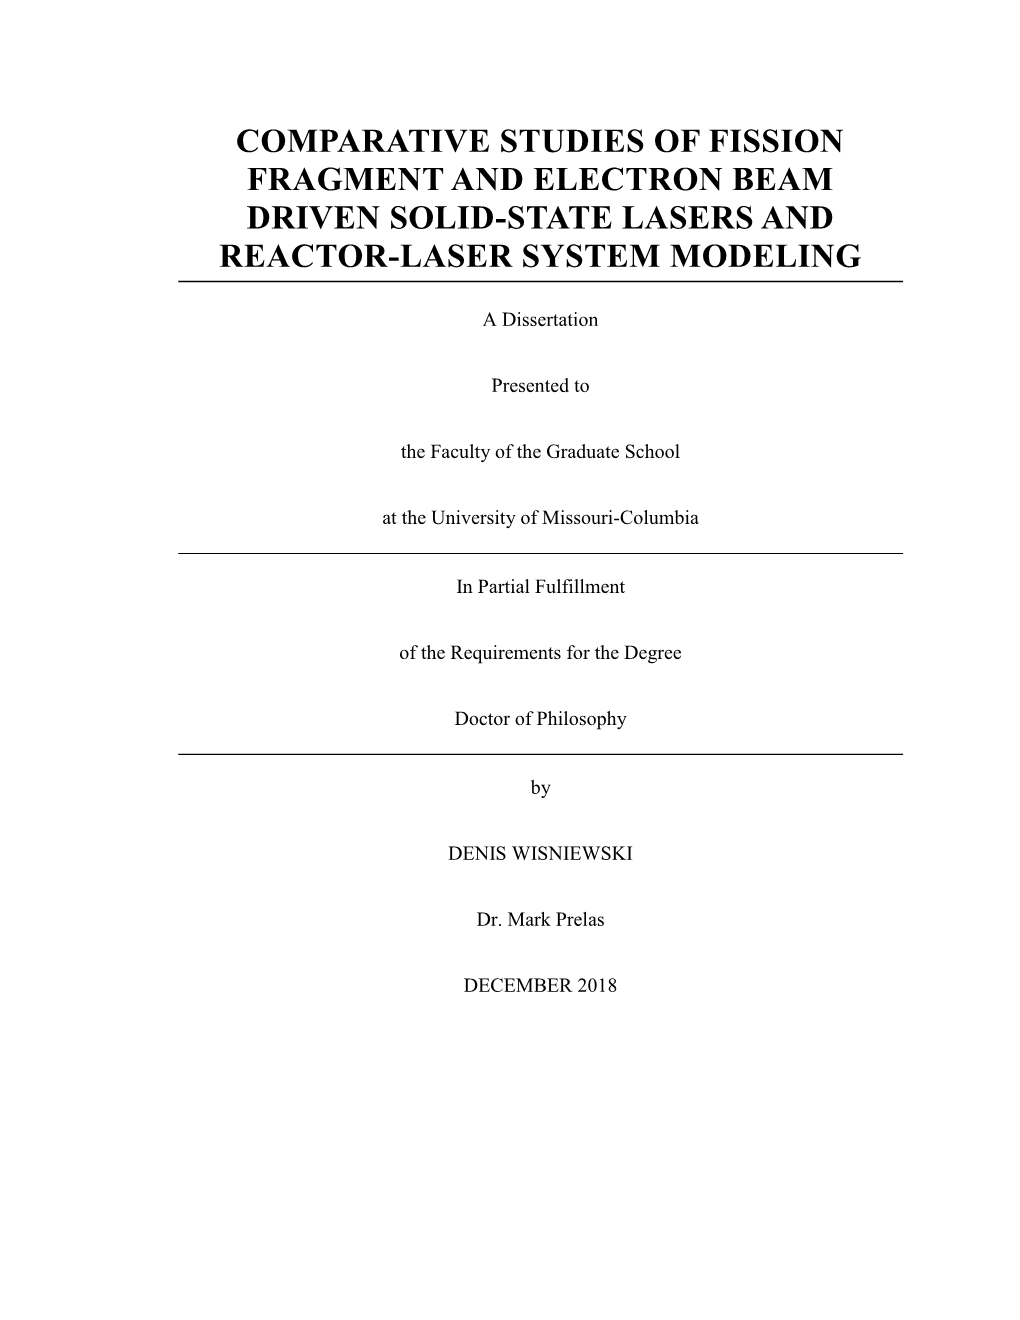 Comparative Studies of Fission Fragment and Electron Beam Driven Solid-State Lasers and Reactor-Laser System Modeling